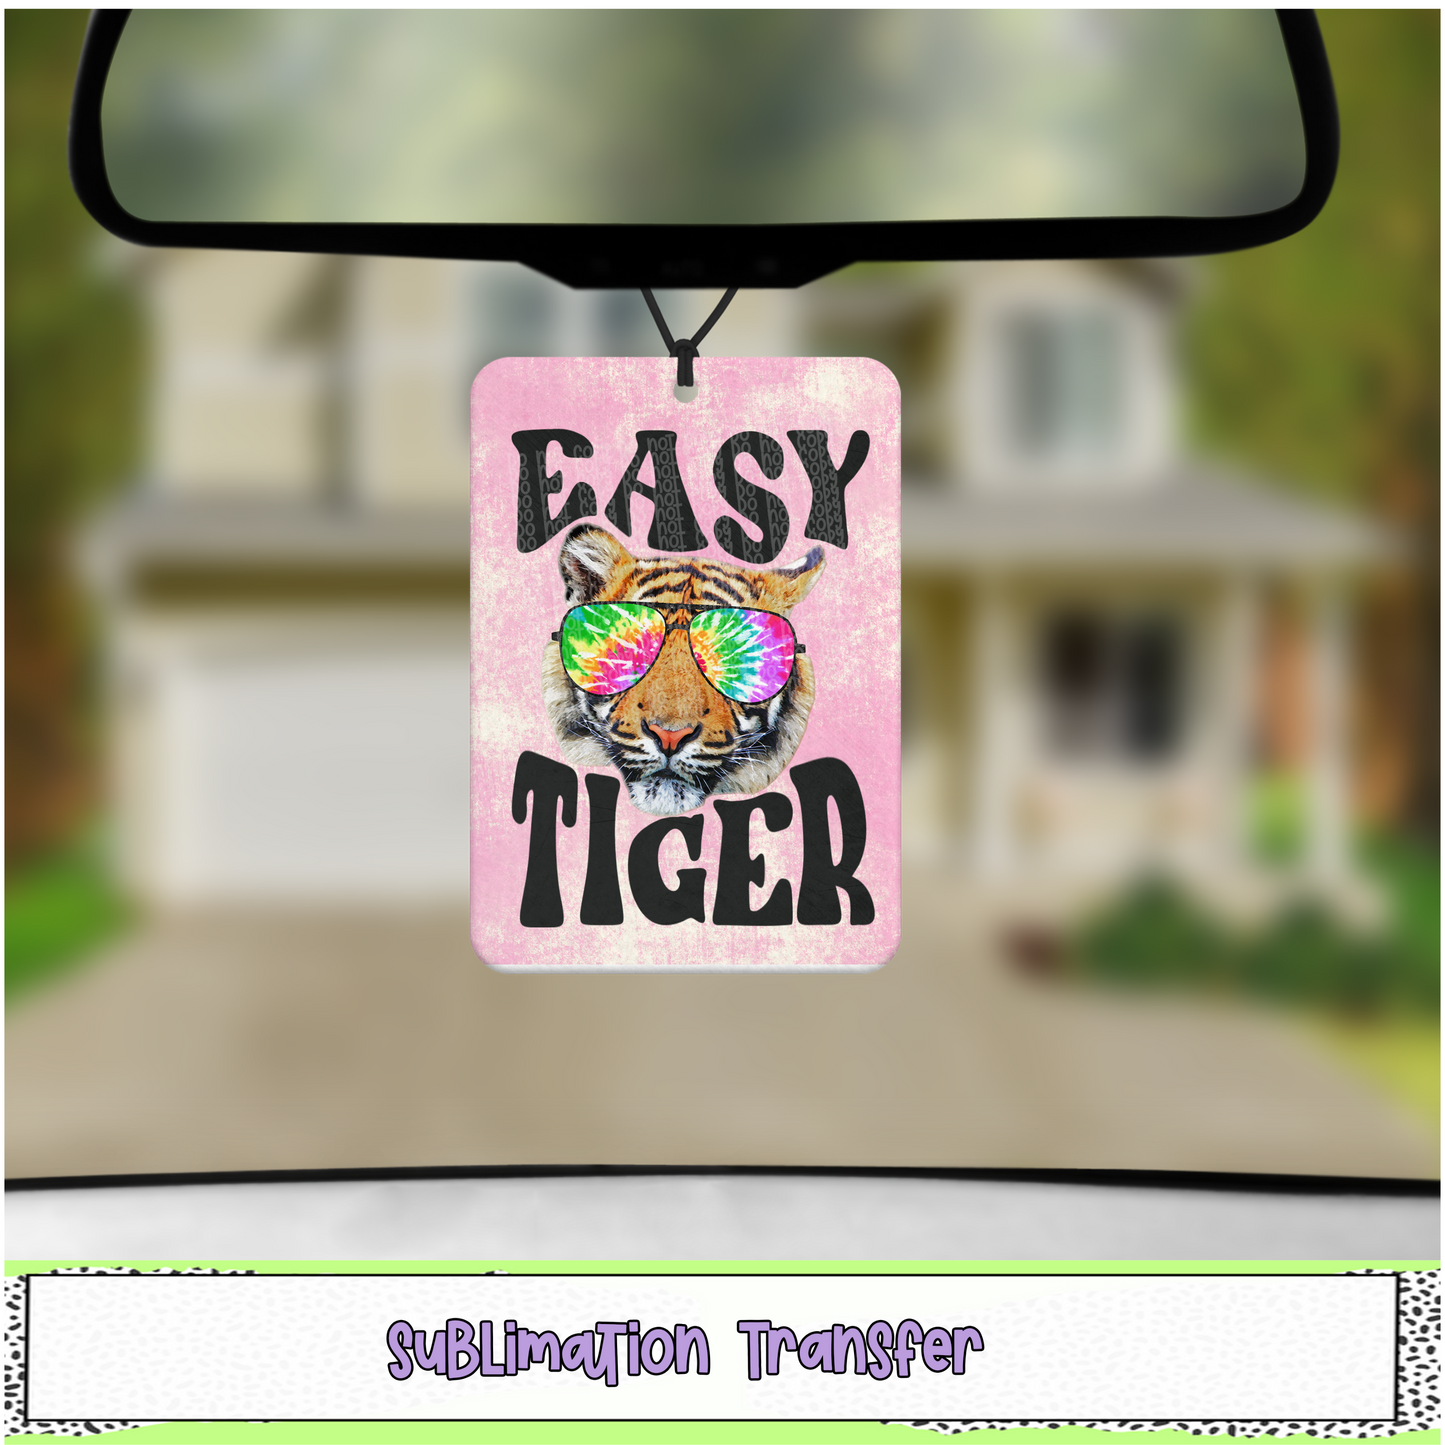 Easy Tiger - Air Freshener Sublimation Transfer - RTS